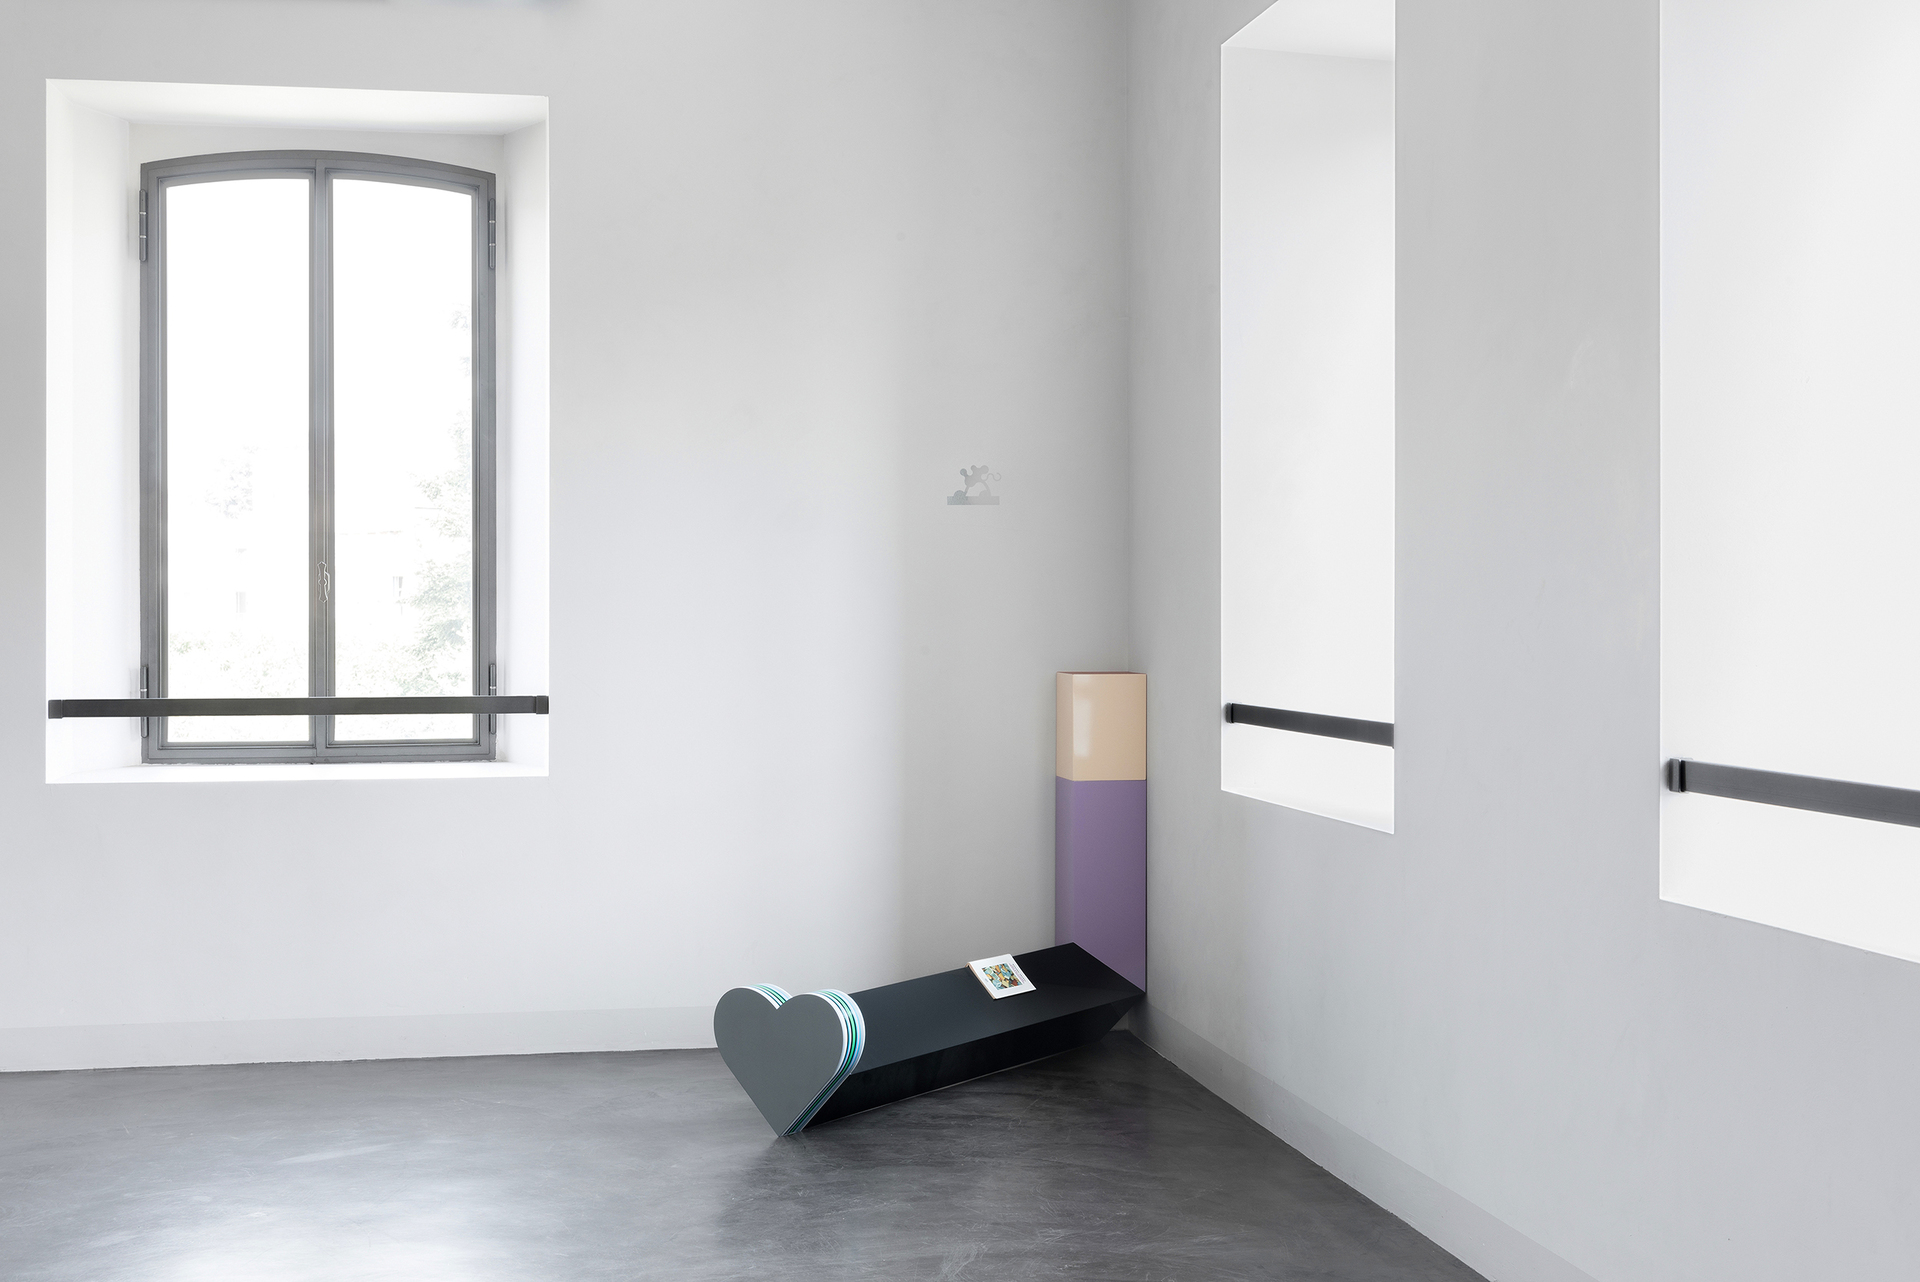 Federico Cantale; Too loud a solitude (Polimorf 3), 2022; Lacquered MDF, book and adhesive vinyl ; 105 x 185 x 30 cm